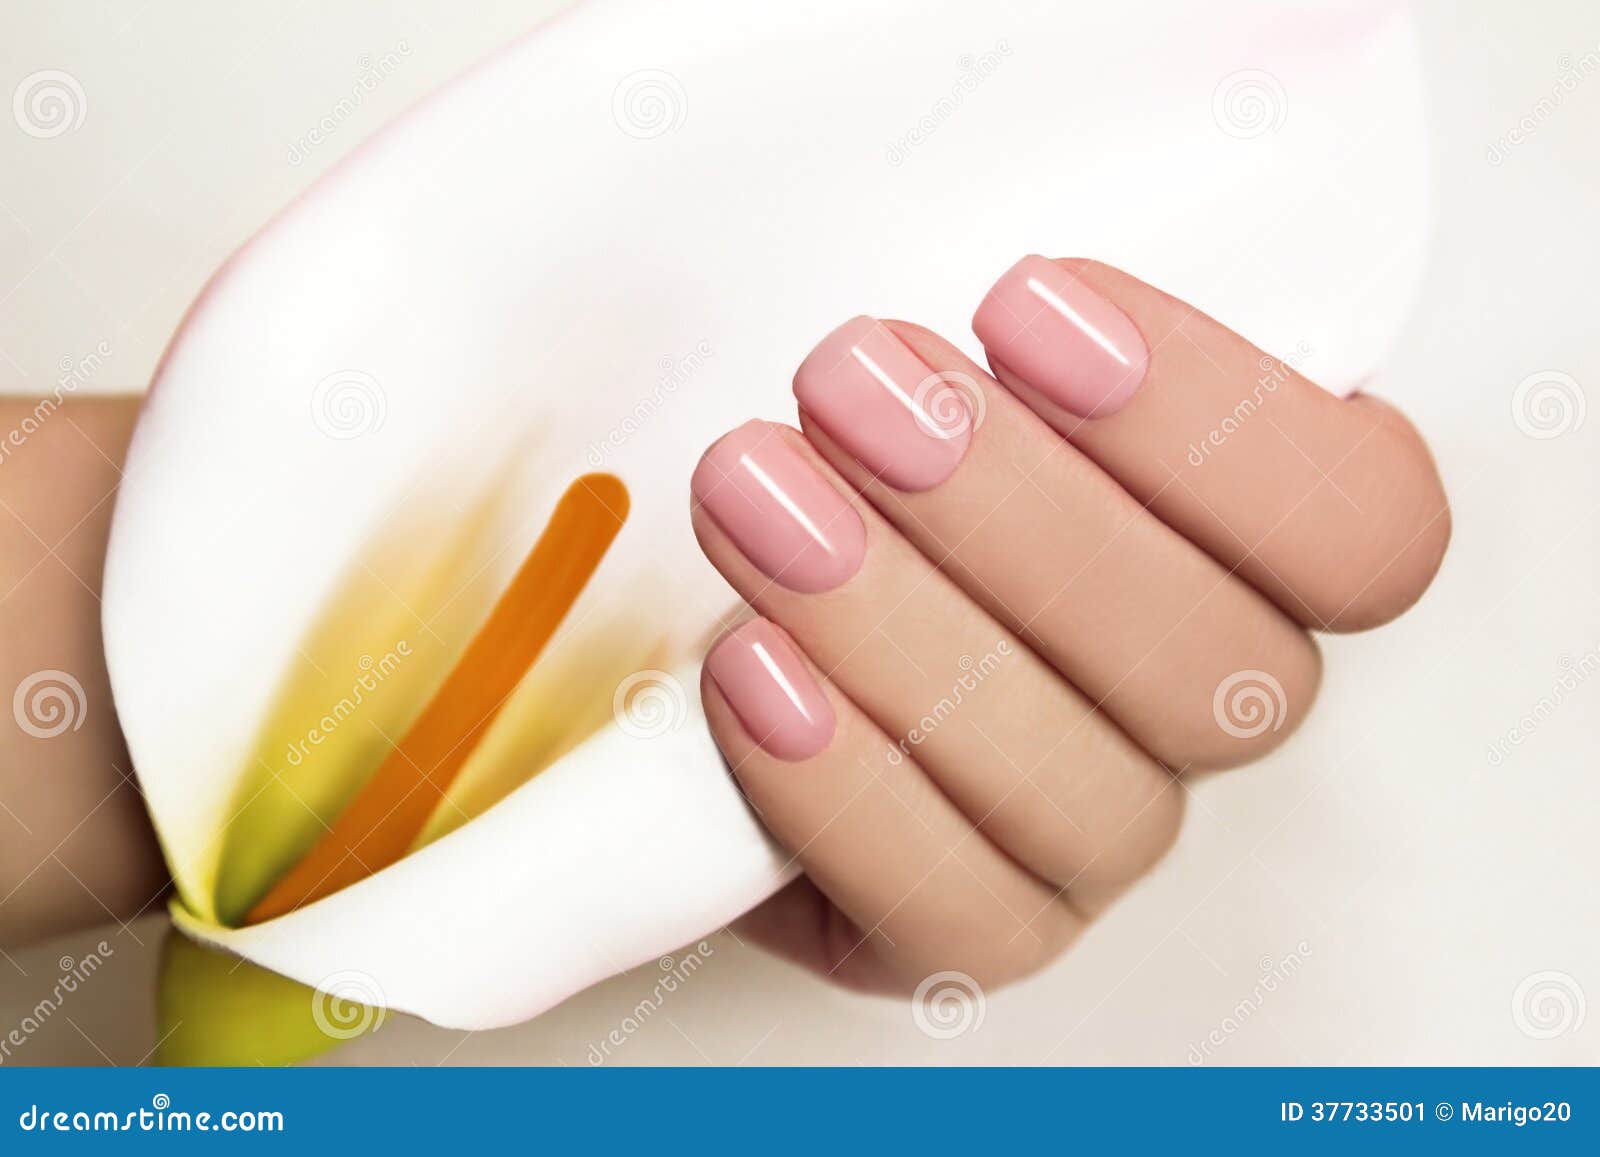 manicure with gel coating .